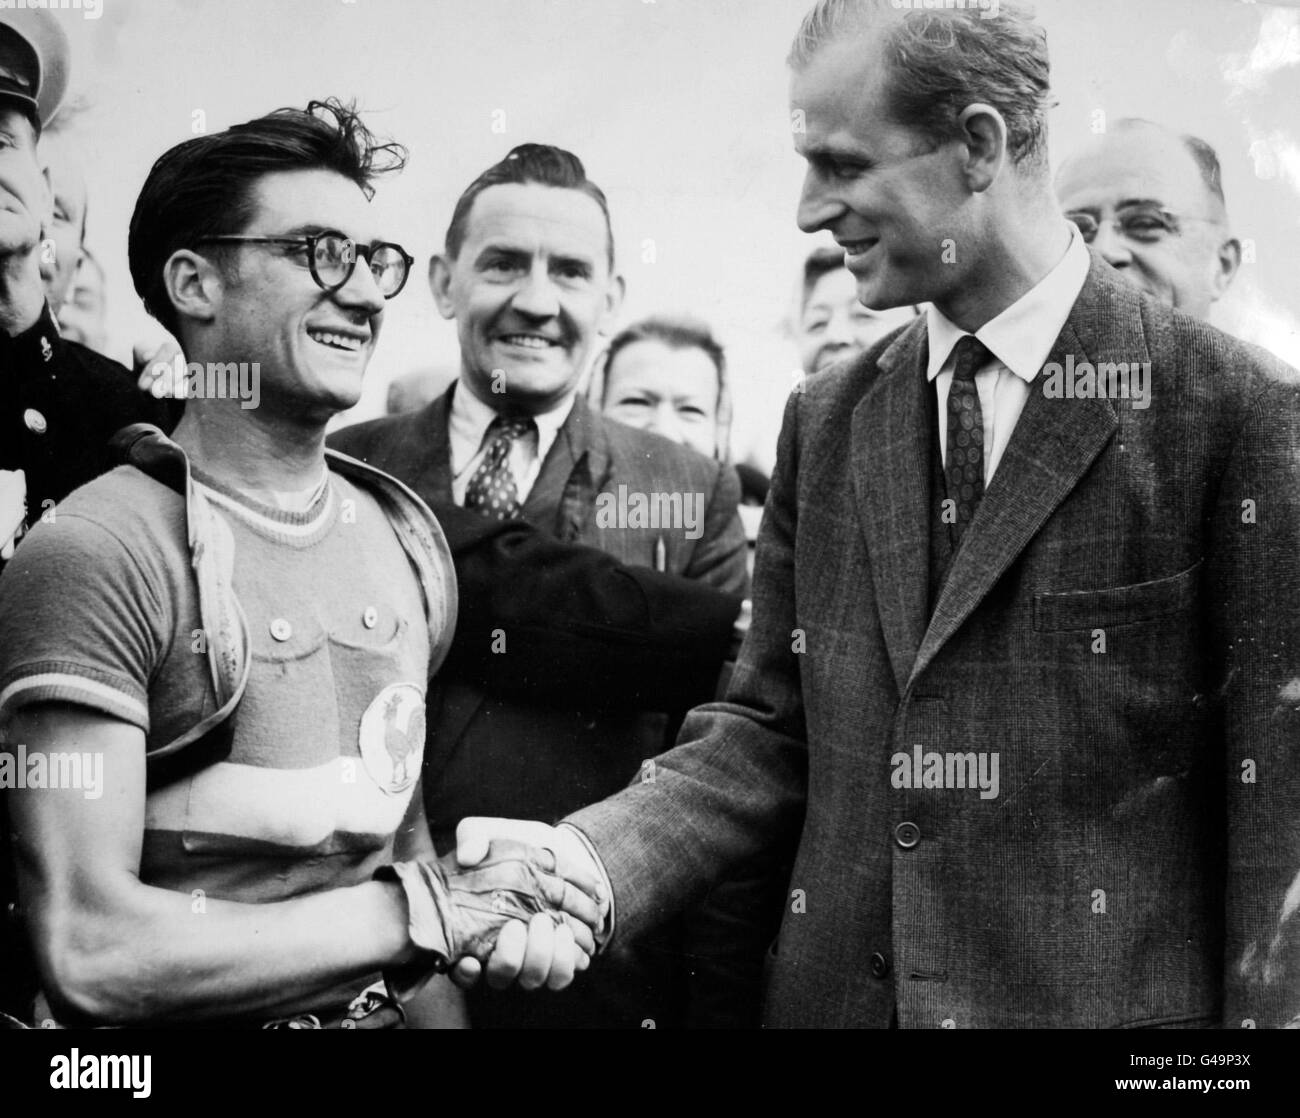 Cycling - Cycle Road Race - Windsor. The Duke of Edinburgh shakes hands with Jose Beyaert of France who won the gruelling 20-mile cycle road race at Windsor Stock Photo